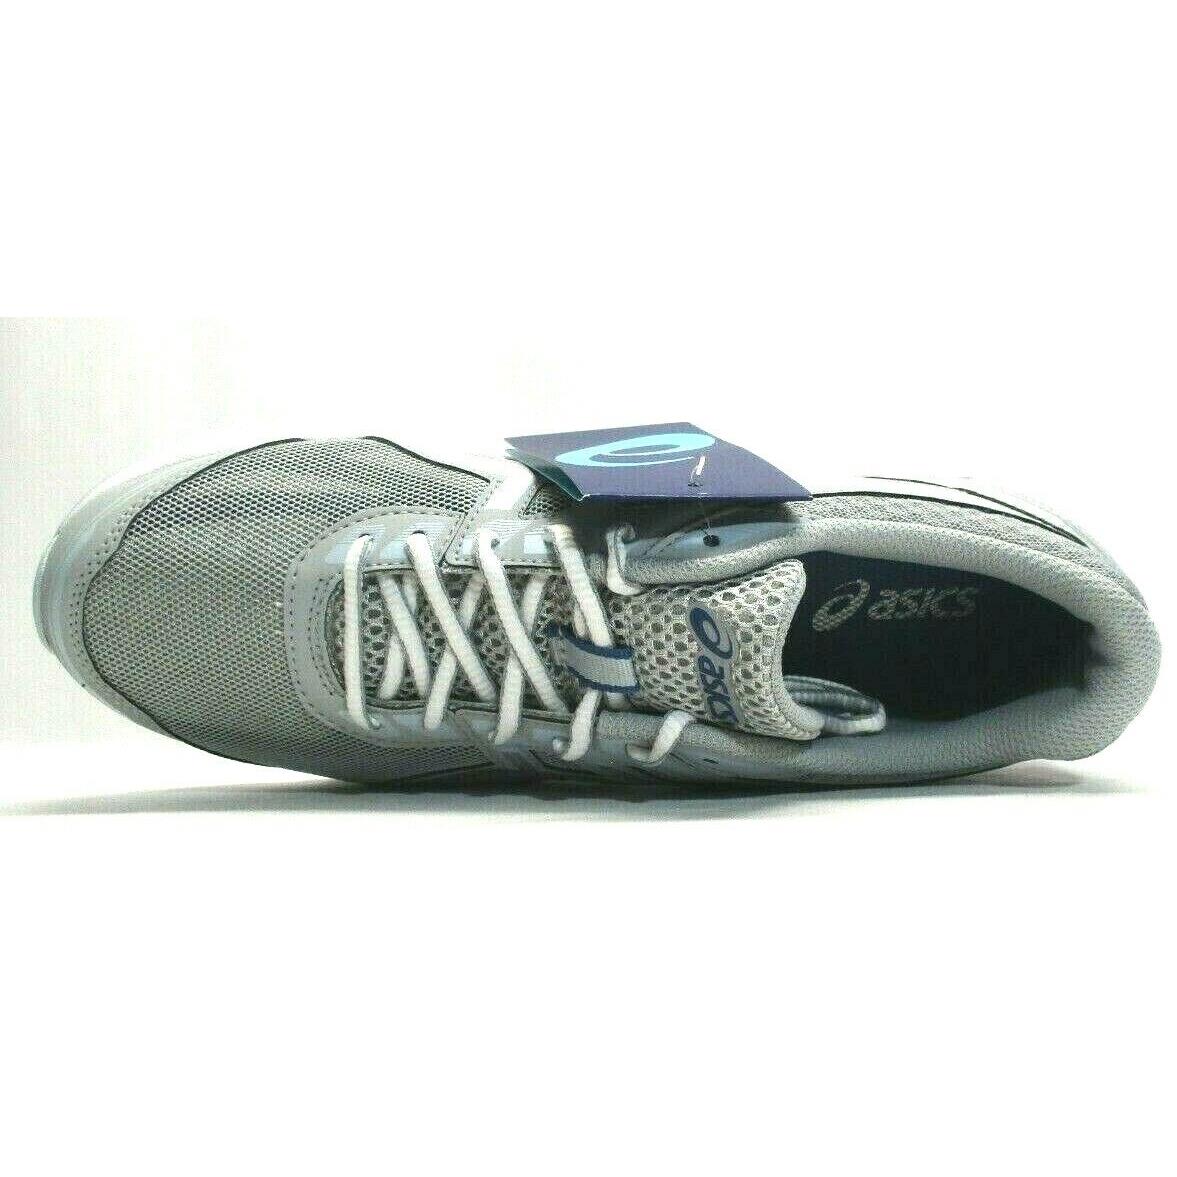 ASICS shoes  - Grey , Silver 5